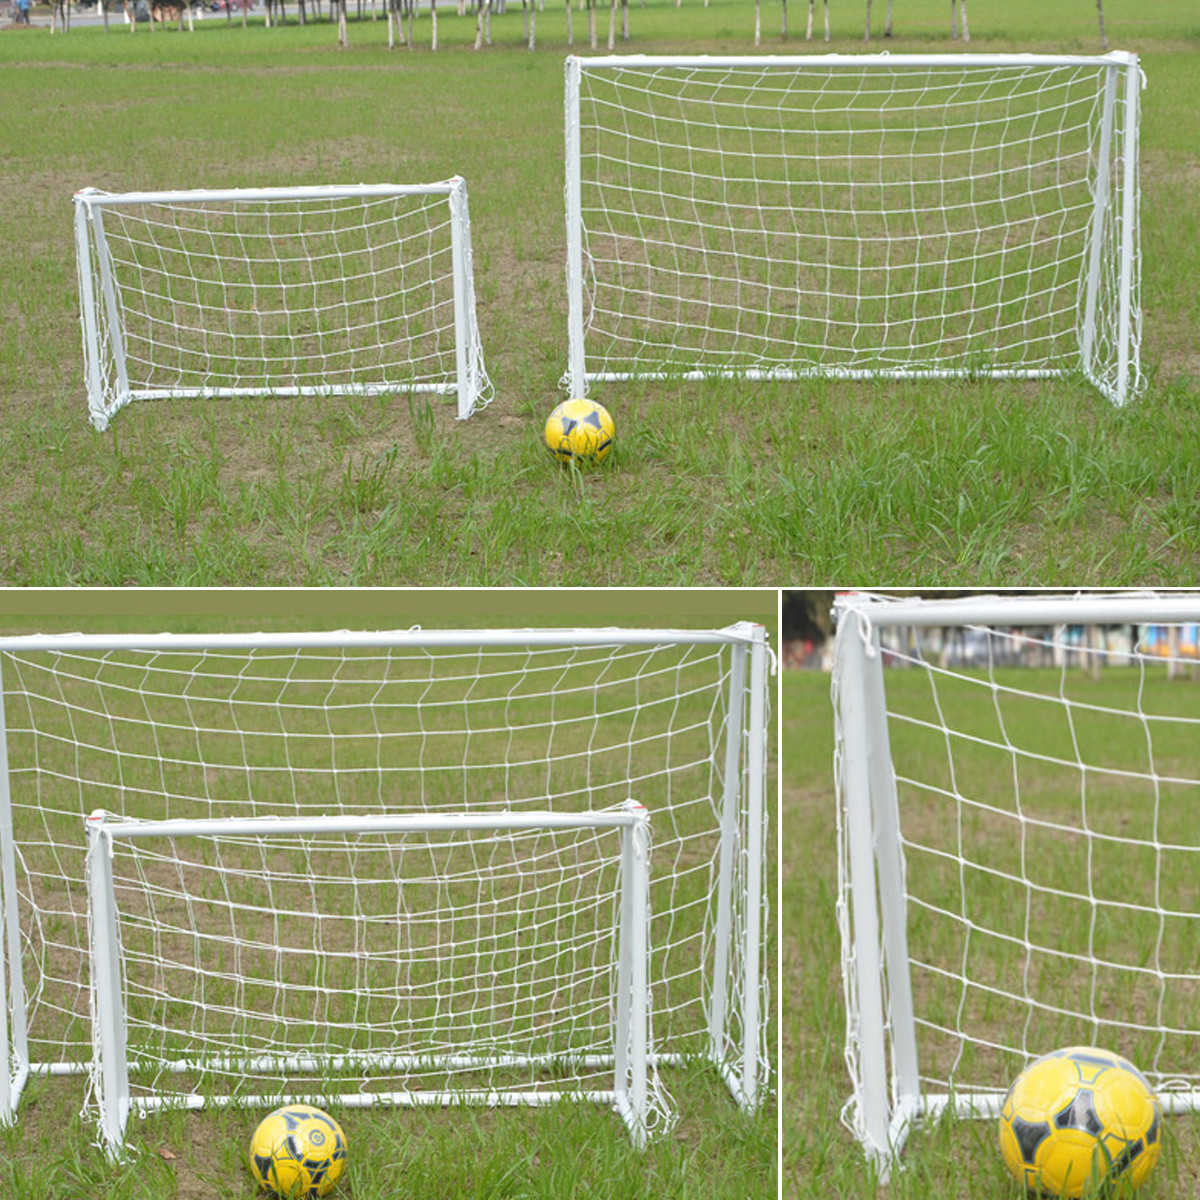 Football-Soccer-Goal-Post-Net-Training-Match-Replace-Outdoor-Full-Size-Adult-Kid-1249189-6